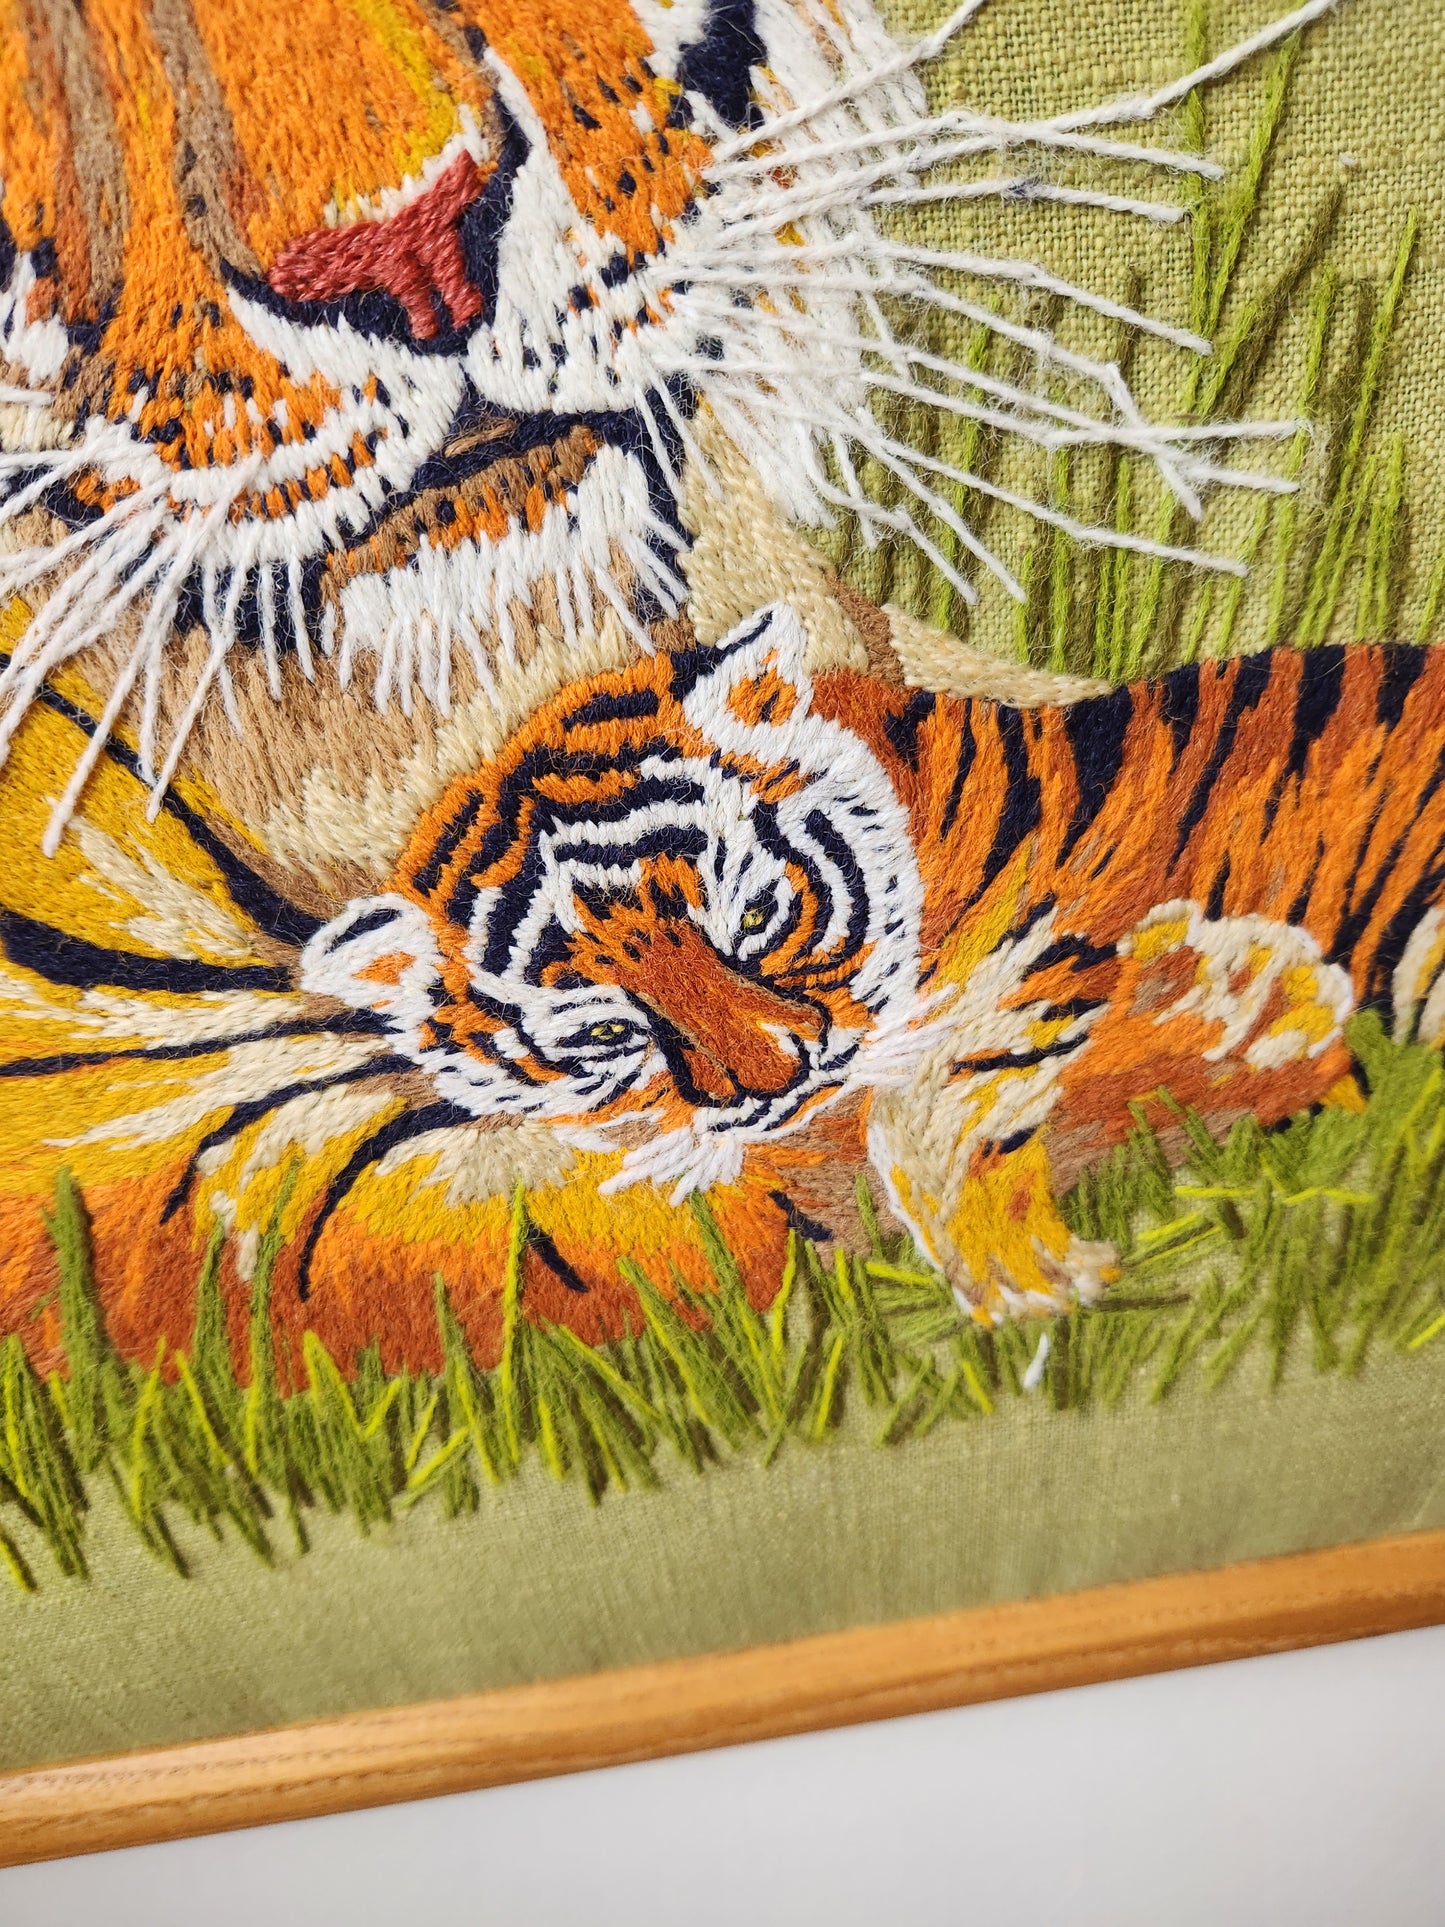 Tiger Embroidery Art